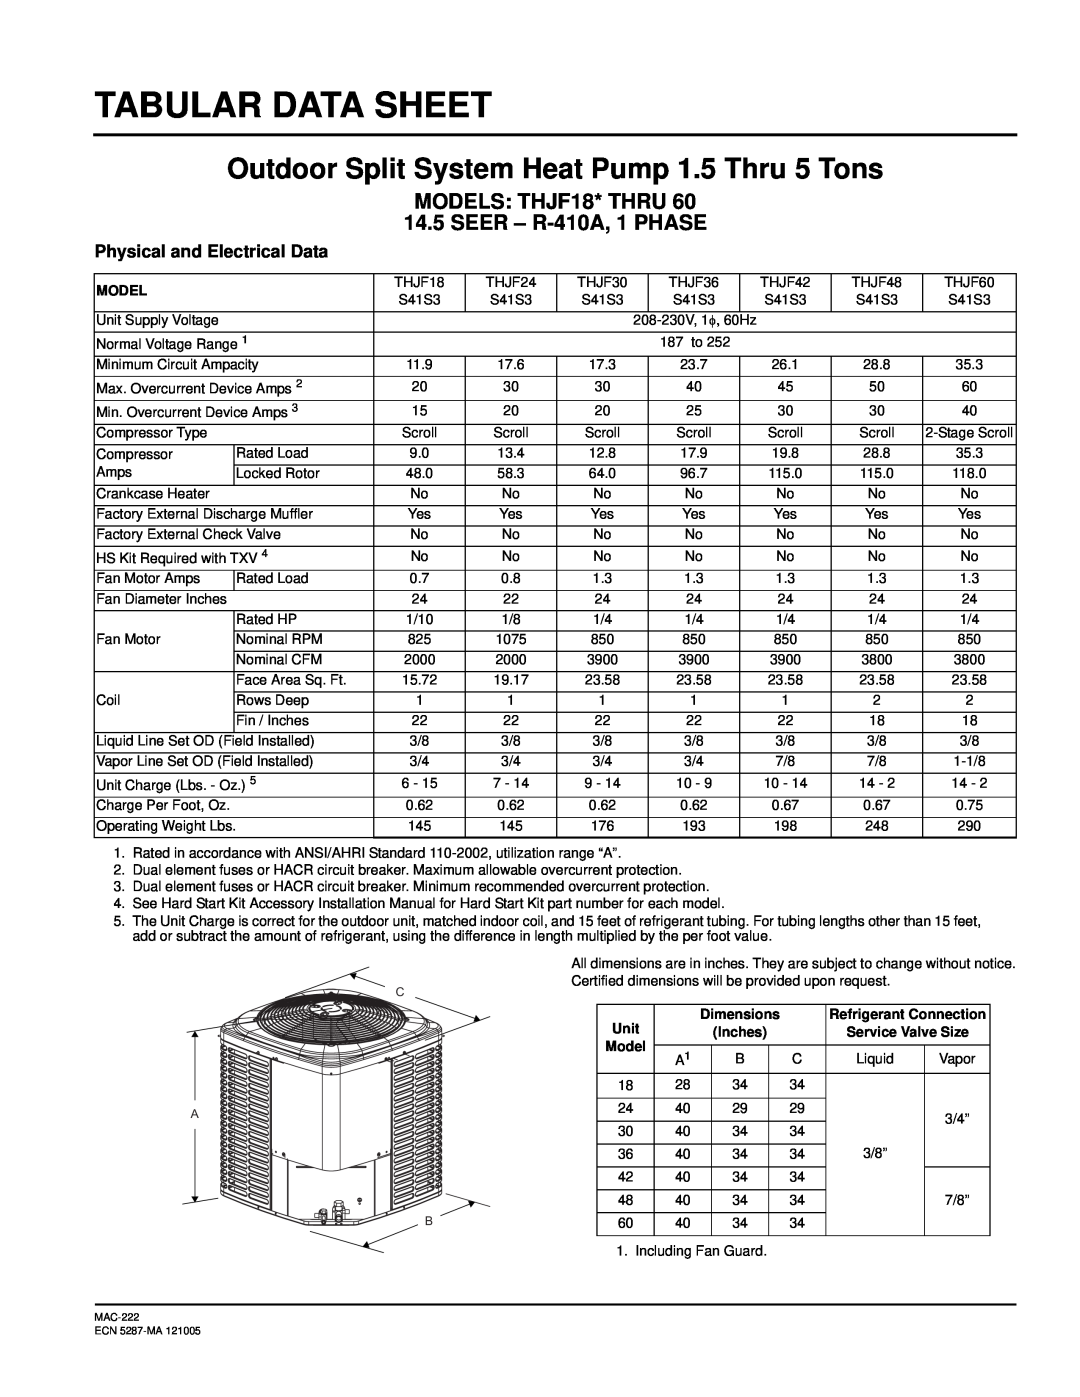 Thermo Products THJF18 THRU 60 dimensions Model, Unit, Service Valve Size, Tabular Data Sheet 